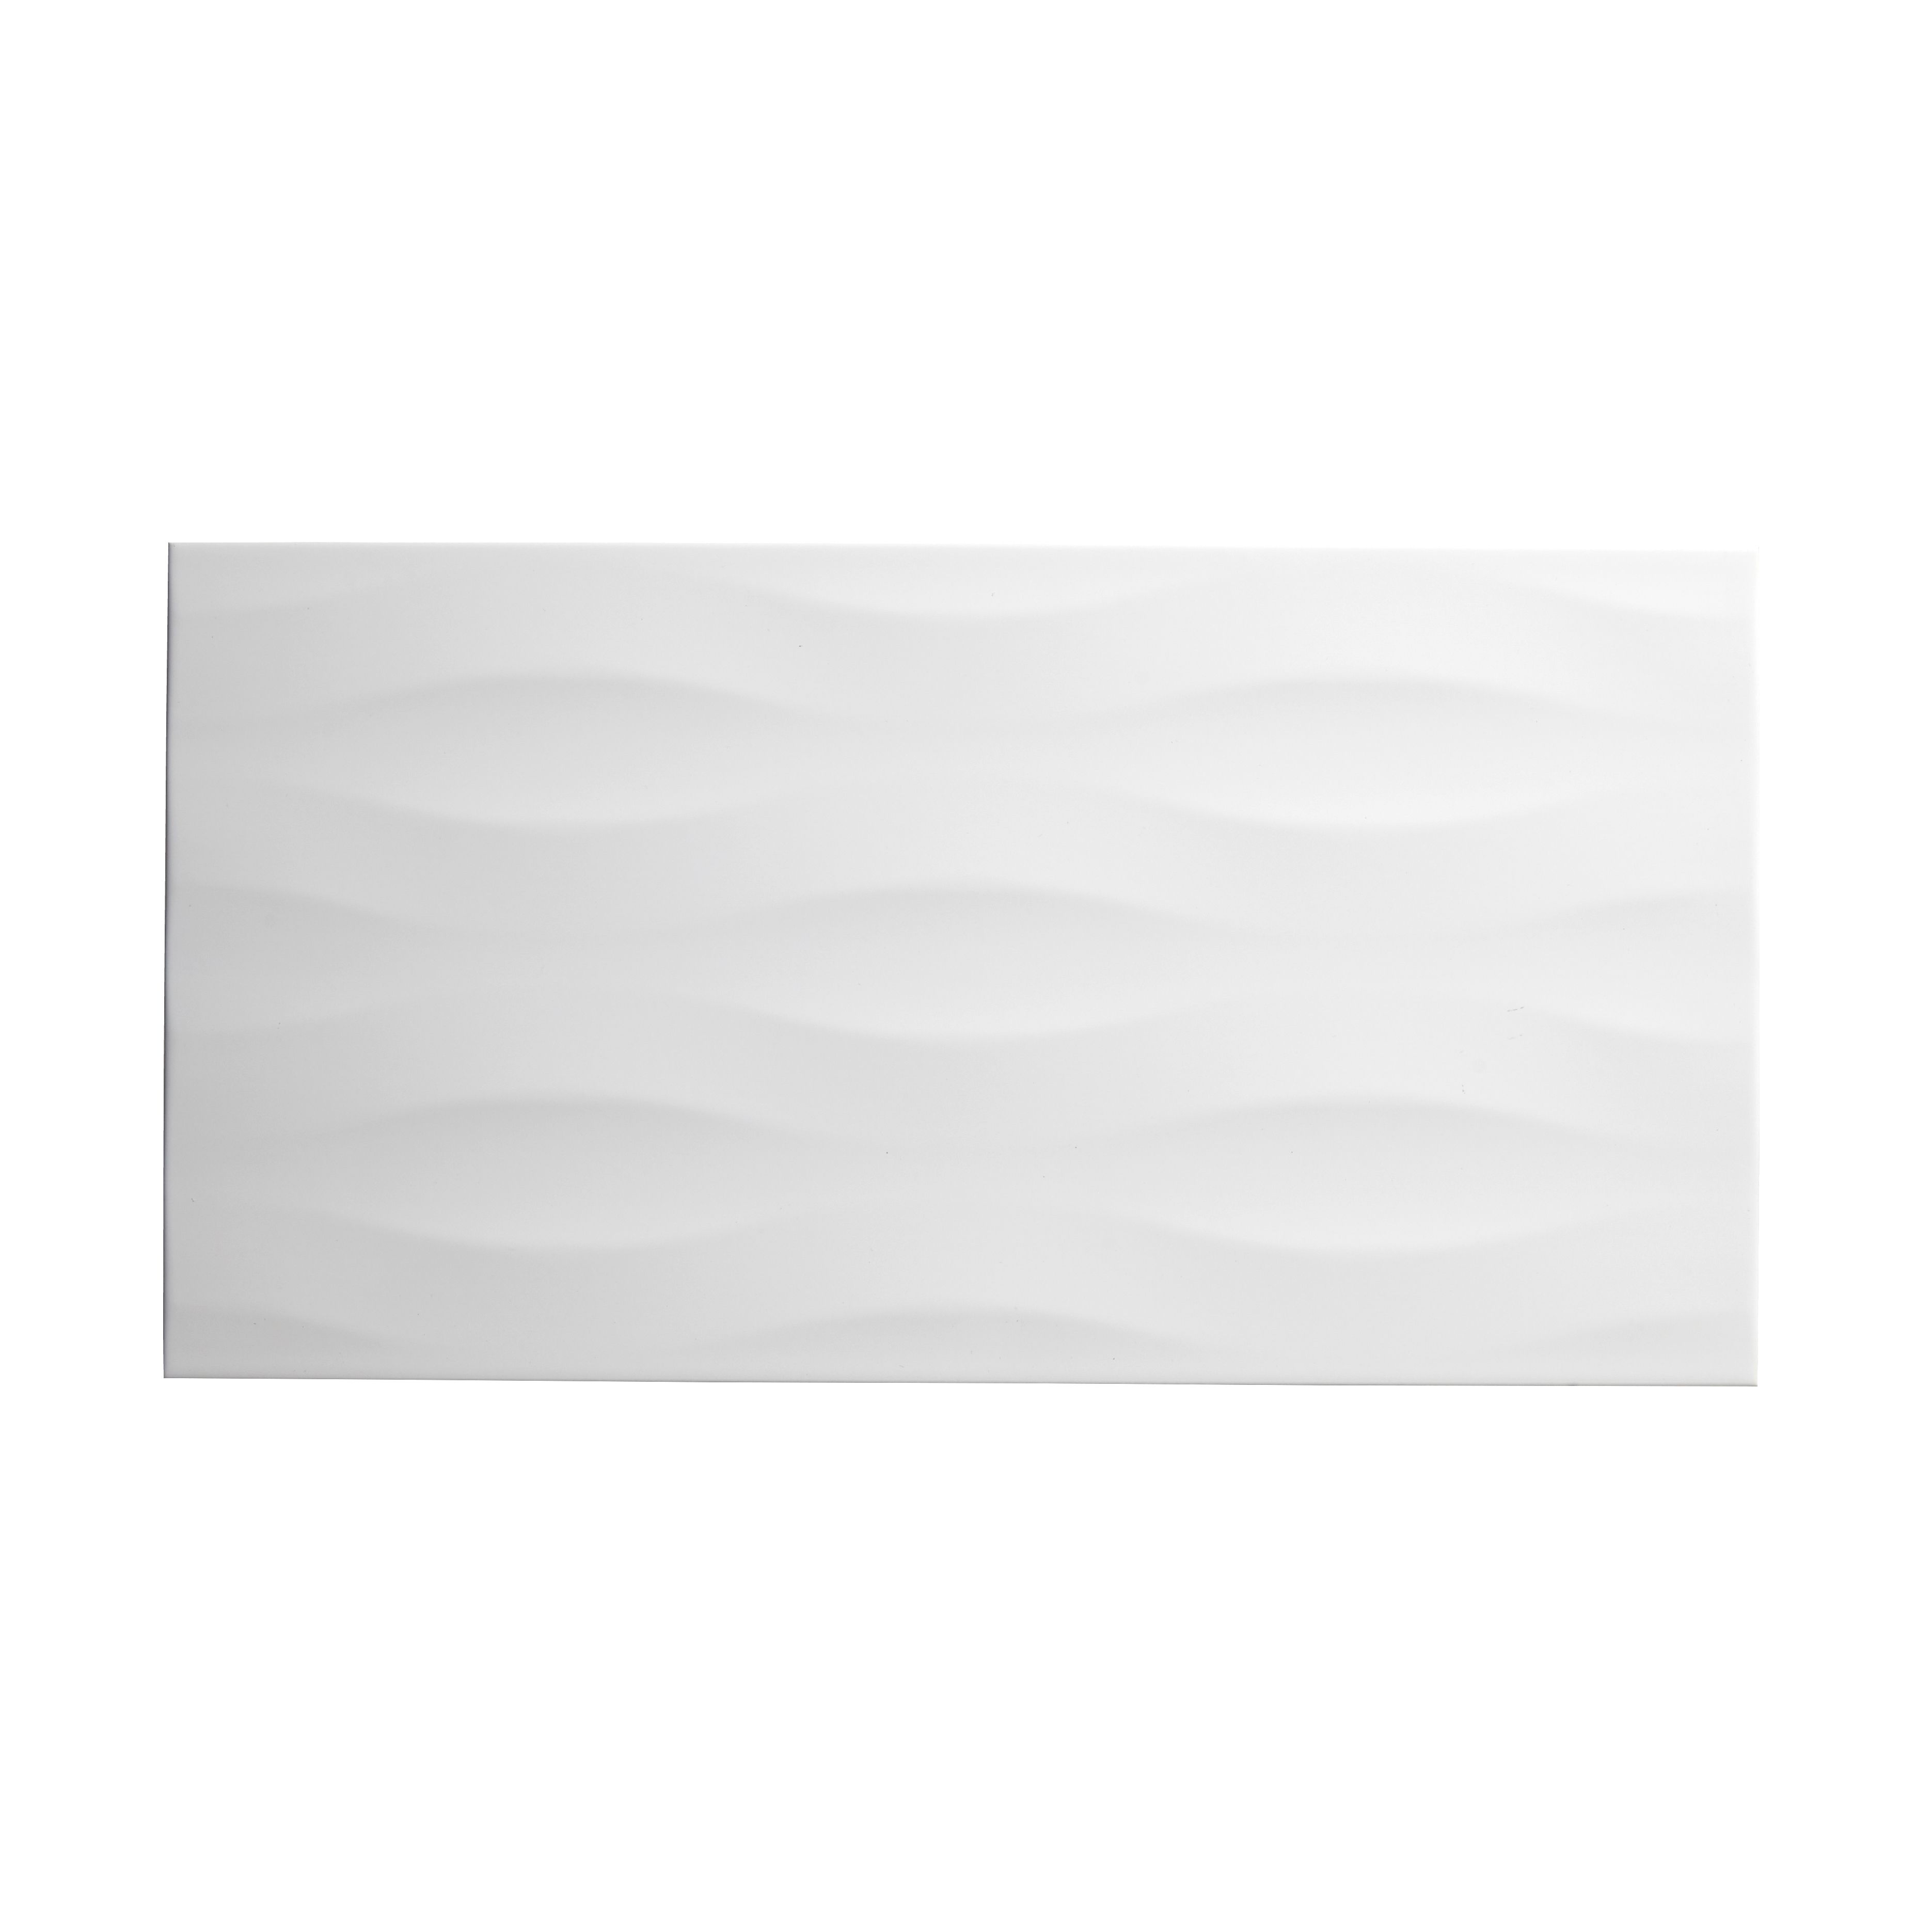 Perouso White Oval Ceramic Wall tile, 1, Sample